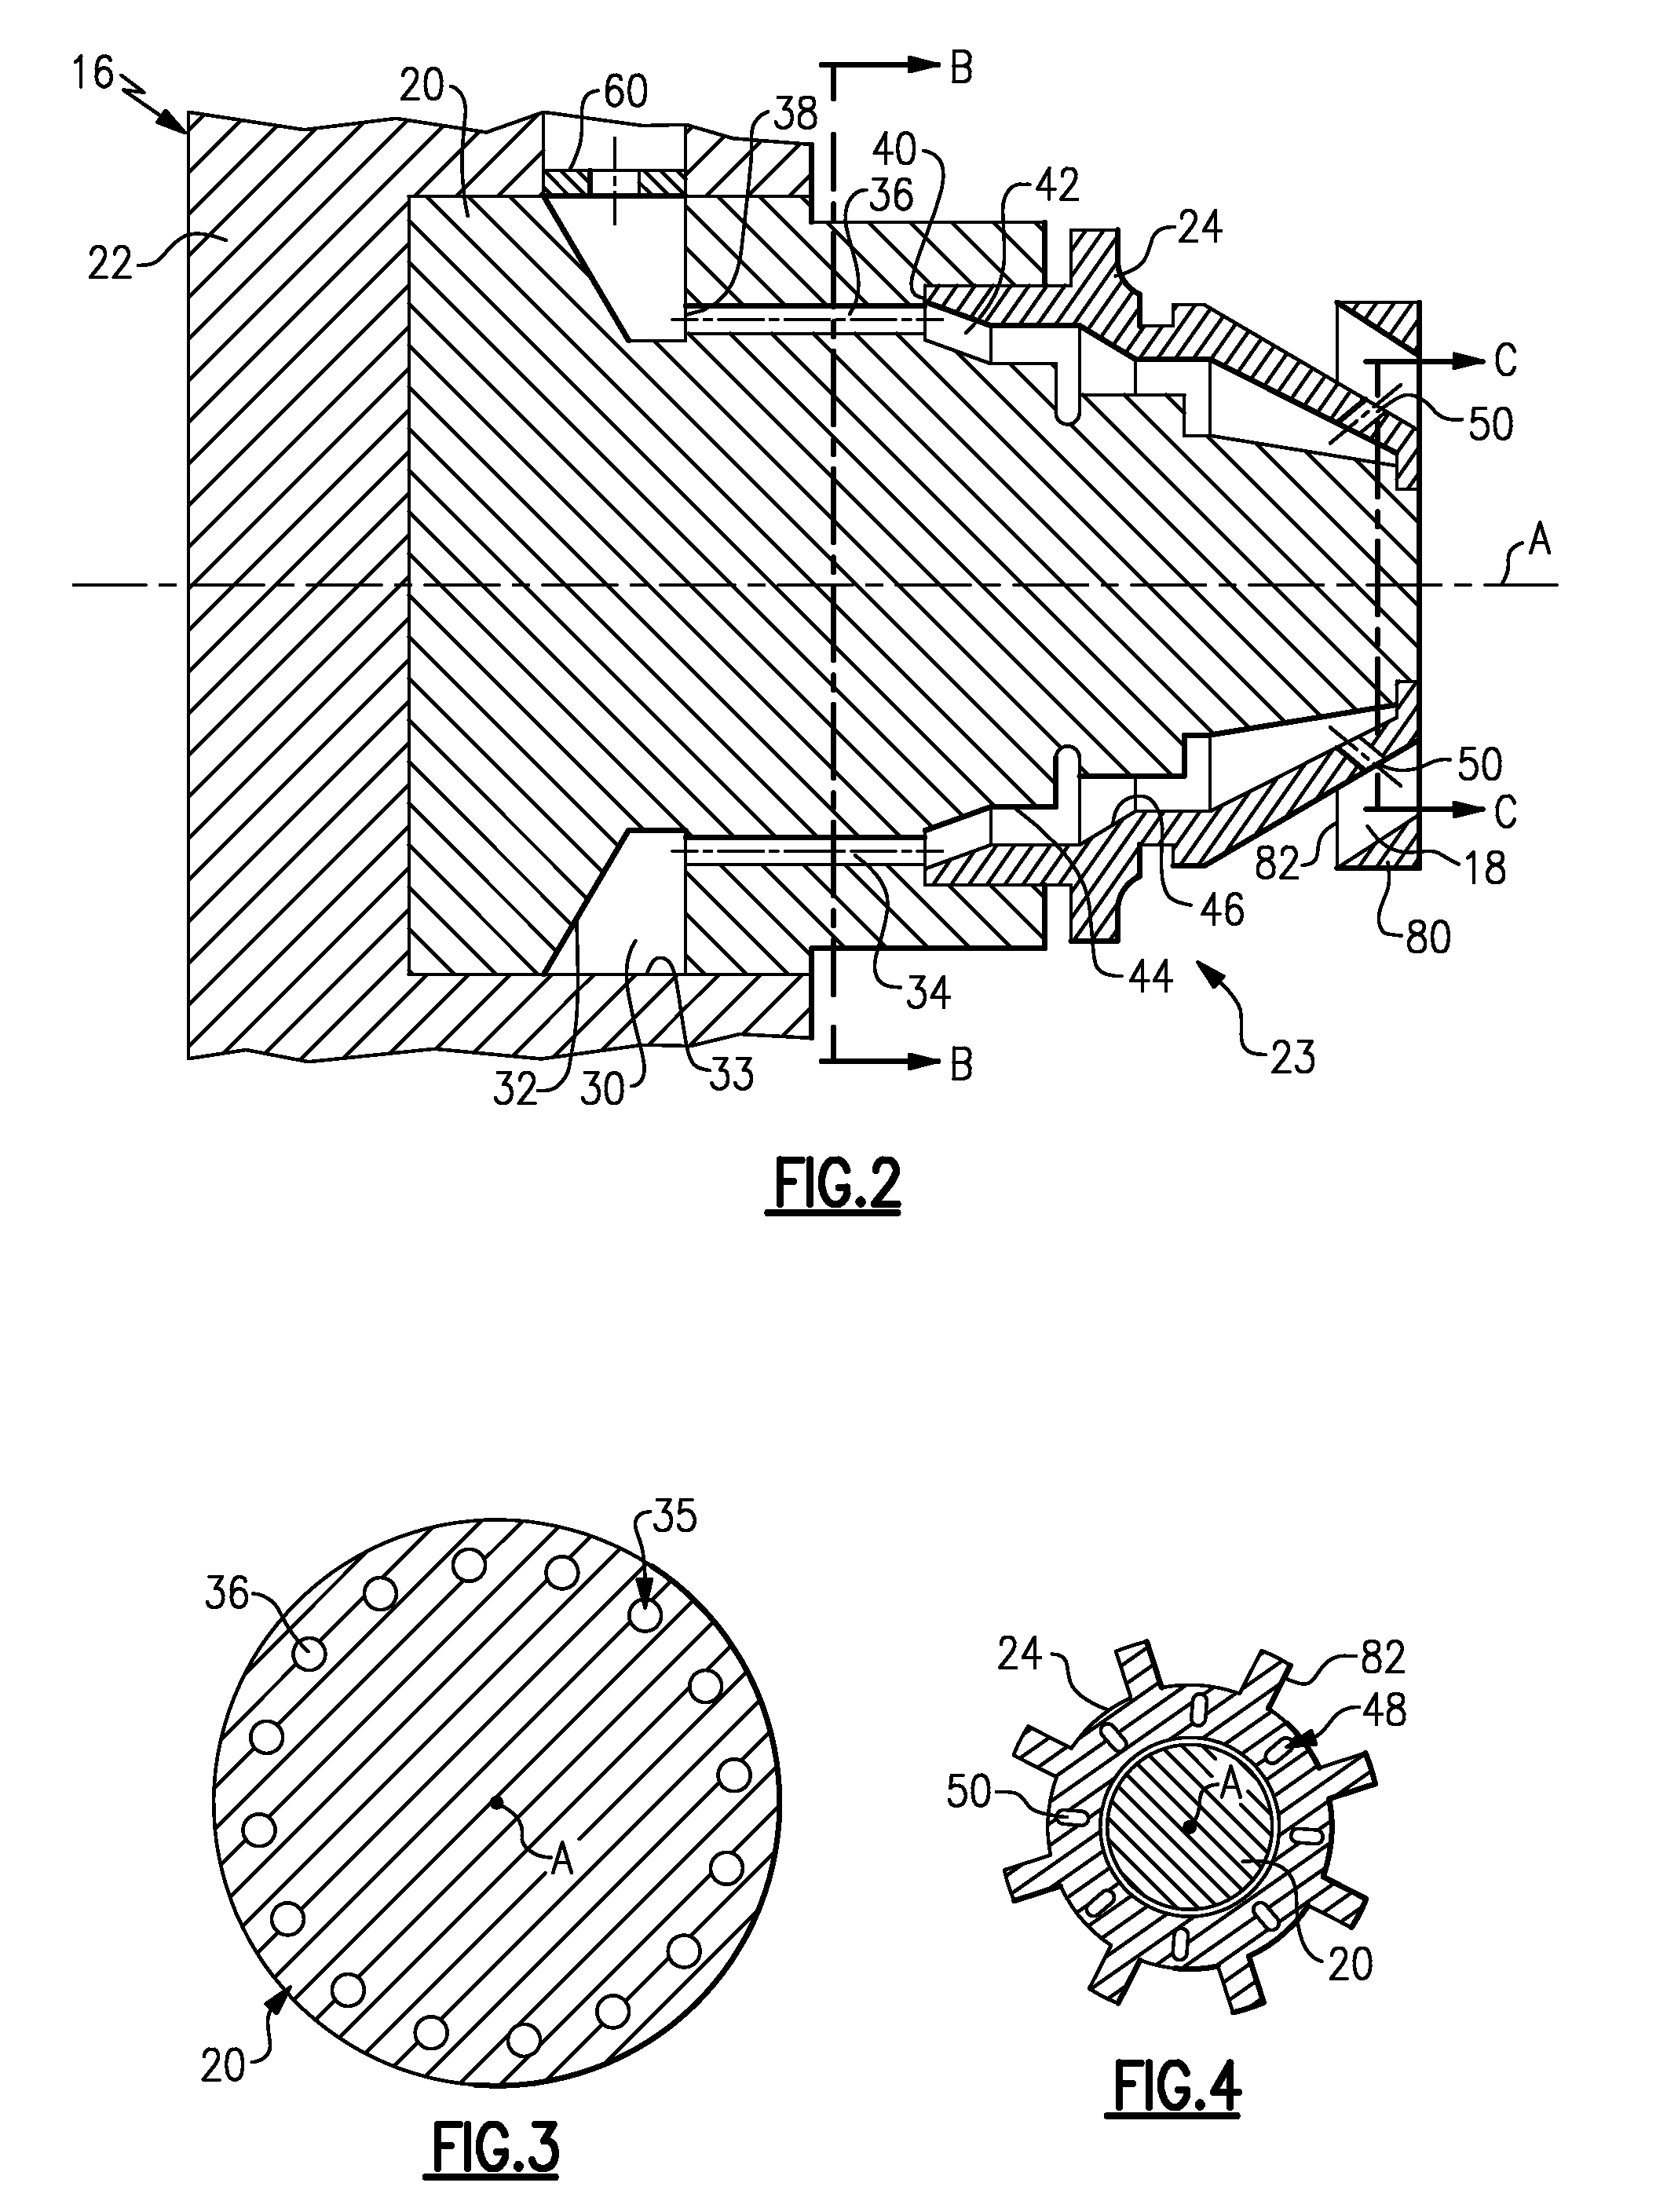 Fuel delivery system for a turbine engine